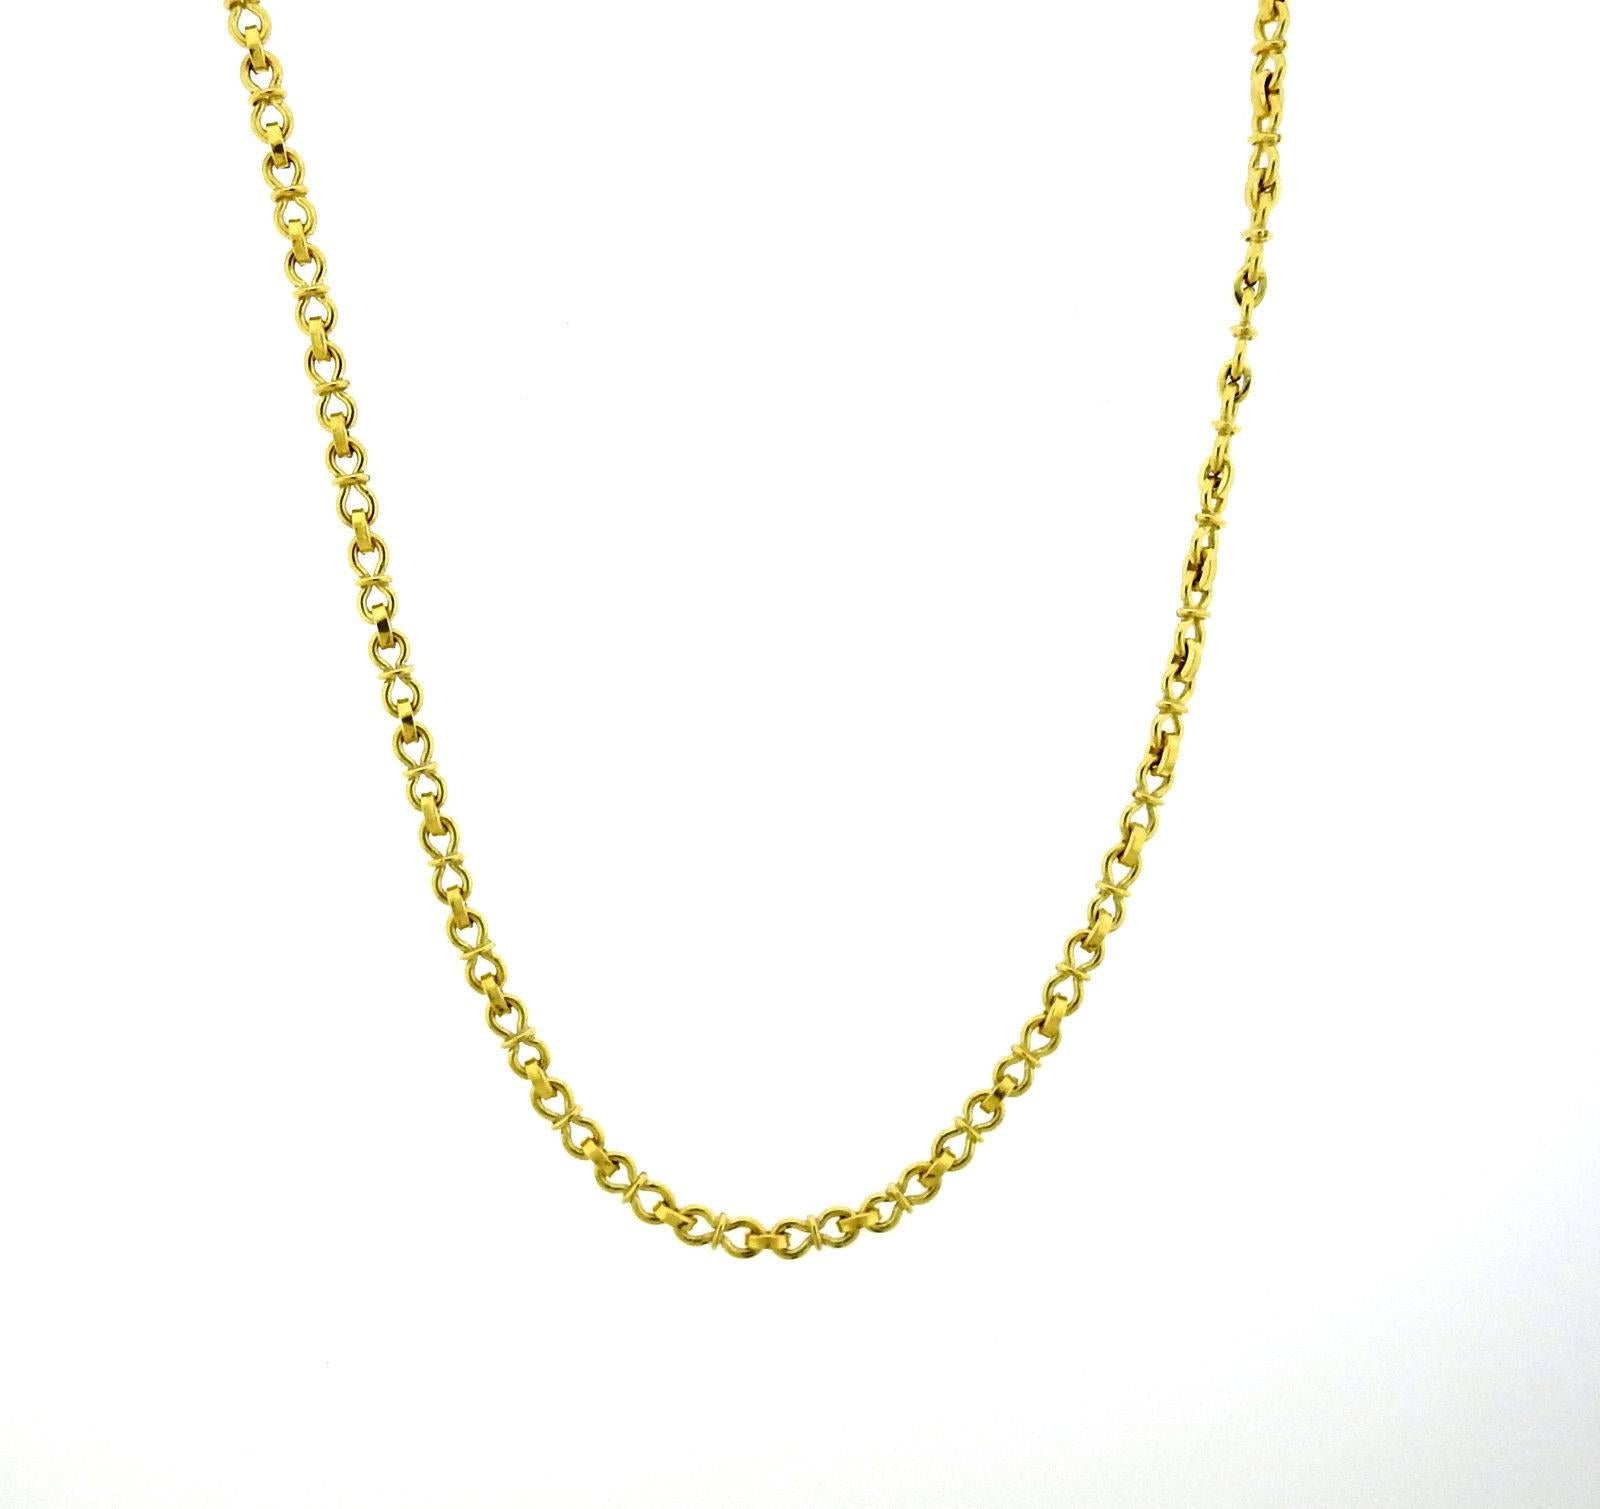 An 18k yellow gold chain necklace by Buccellati.  The necklace is 32 2/8